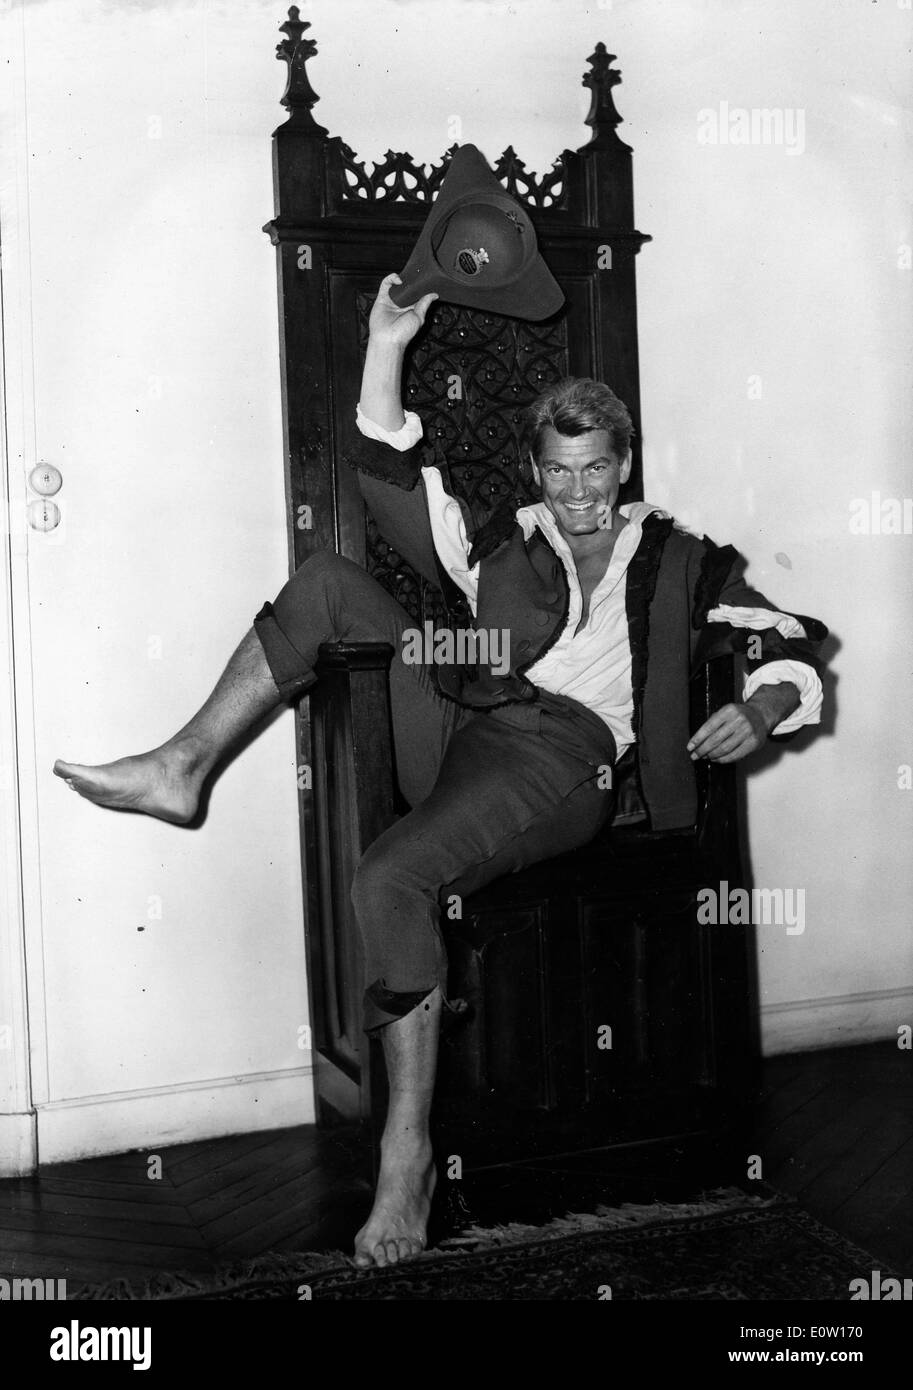 Actor Jean Marais in costume on a throne Stock Photo